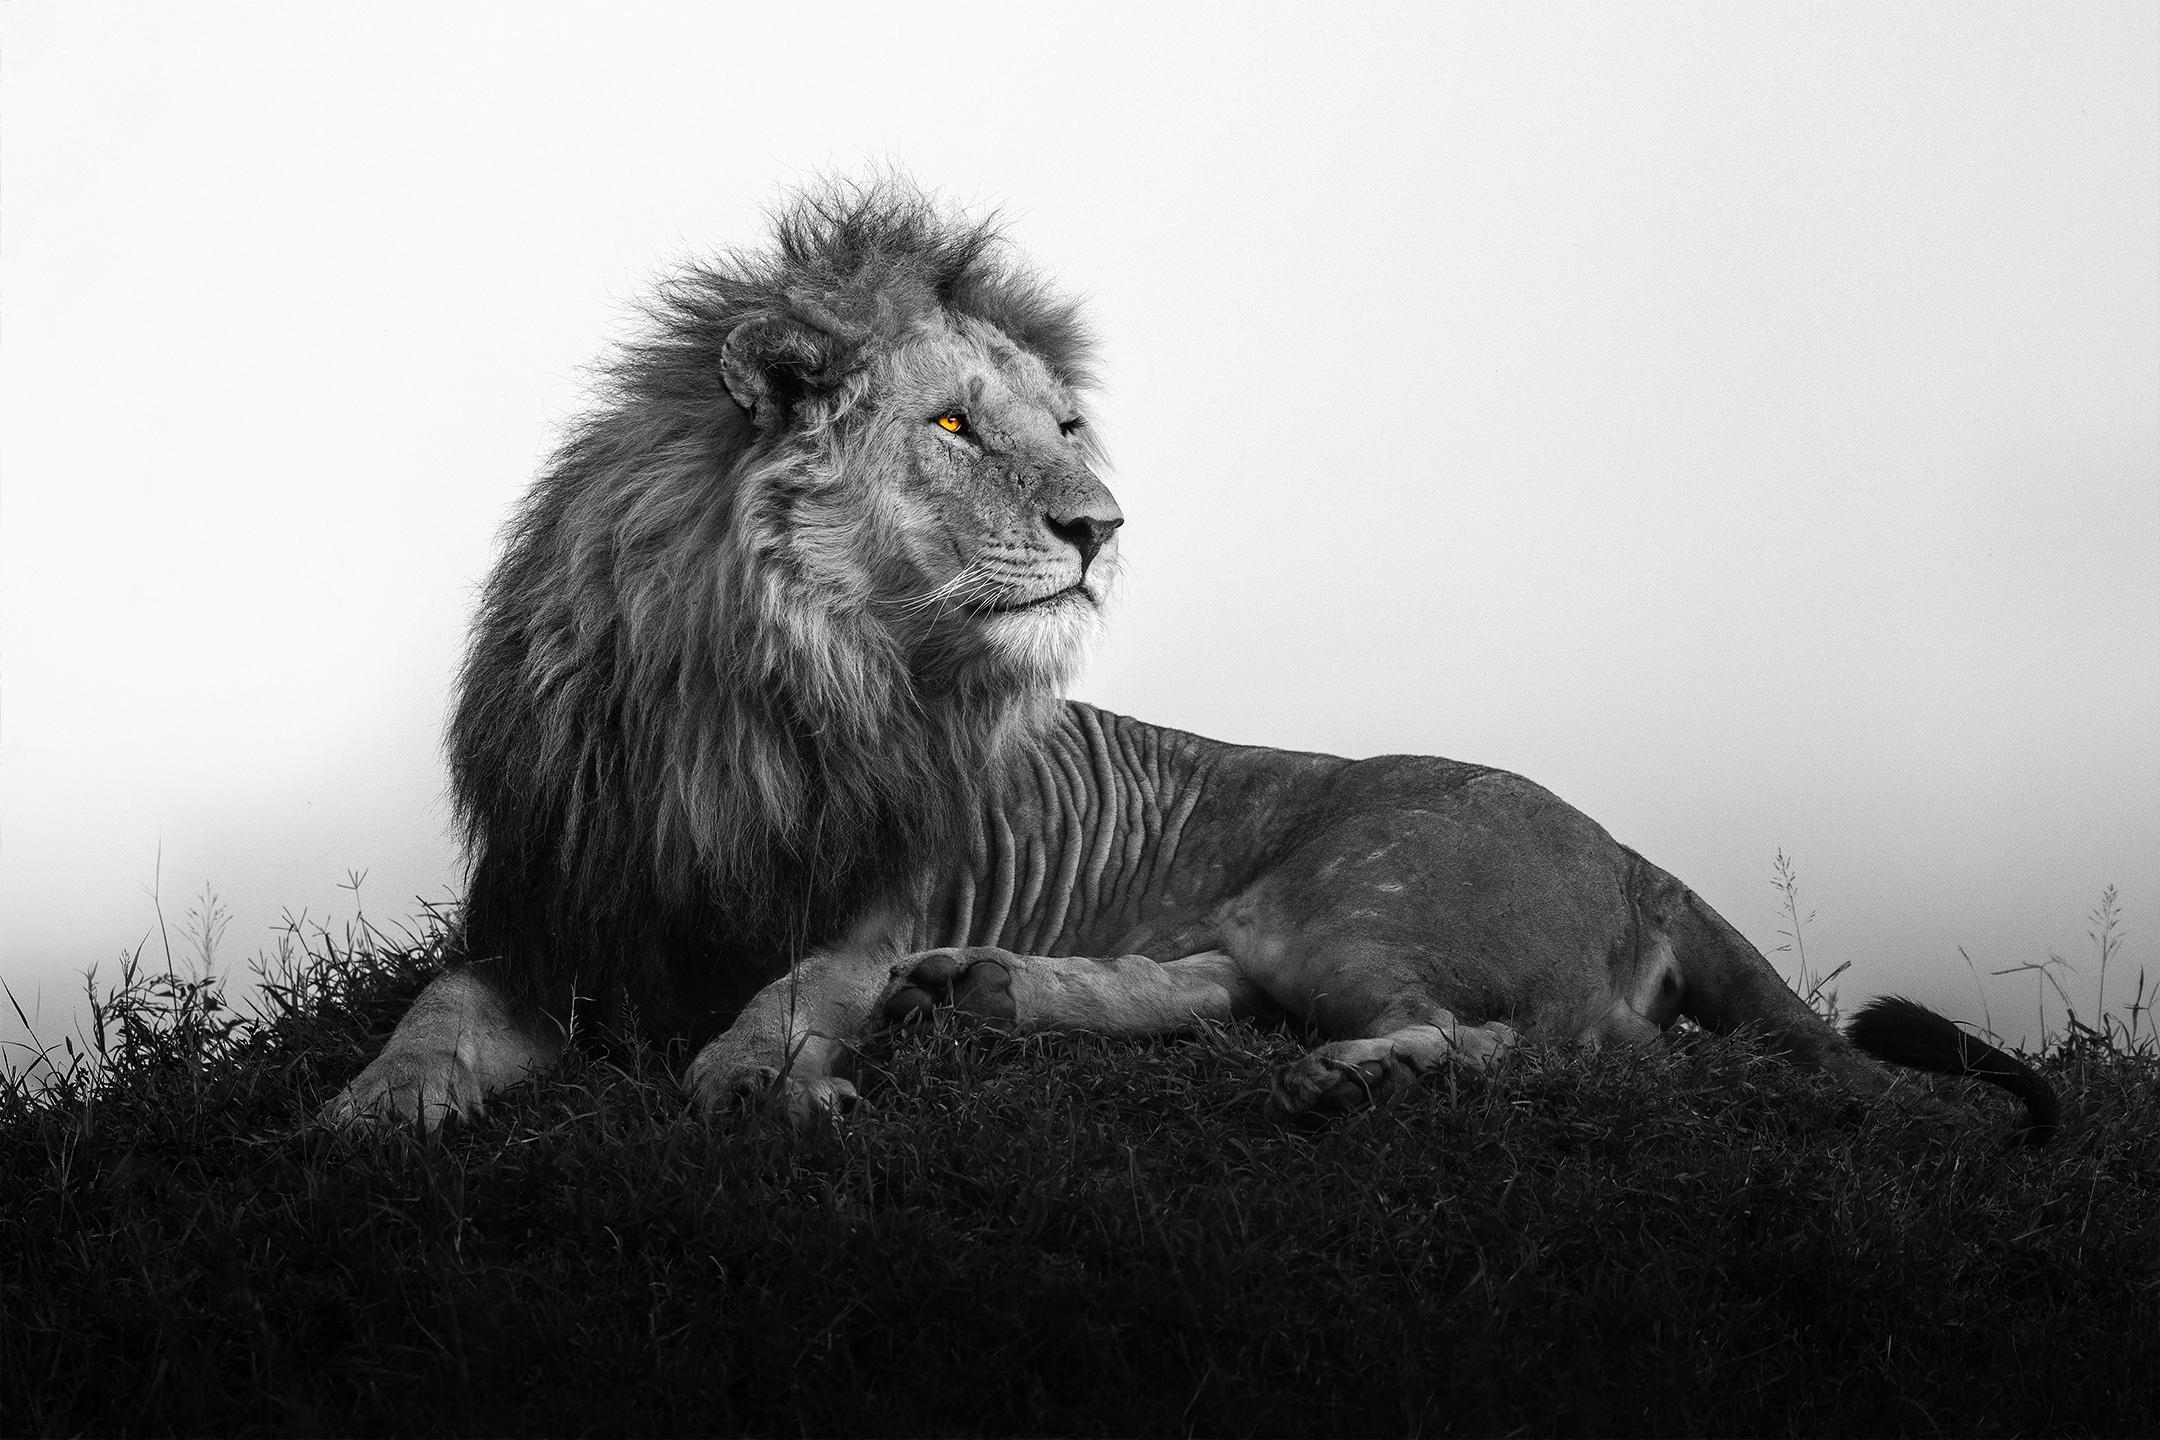 "King Olobor"- Majestic Lion in Africa